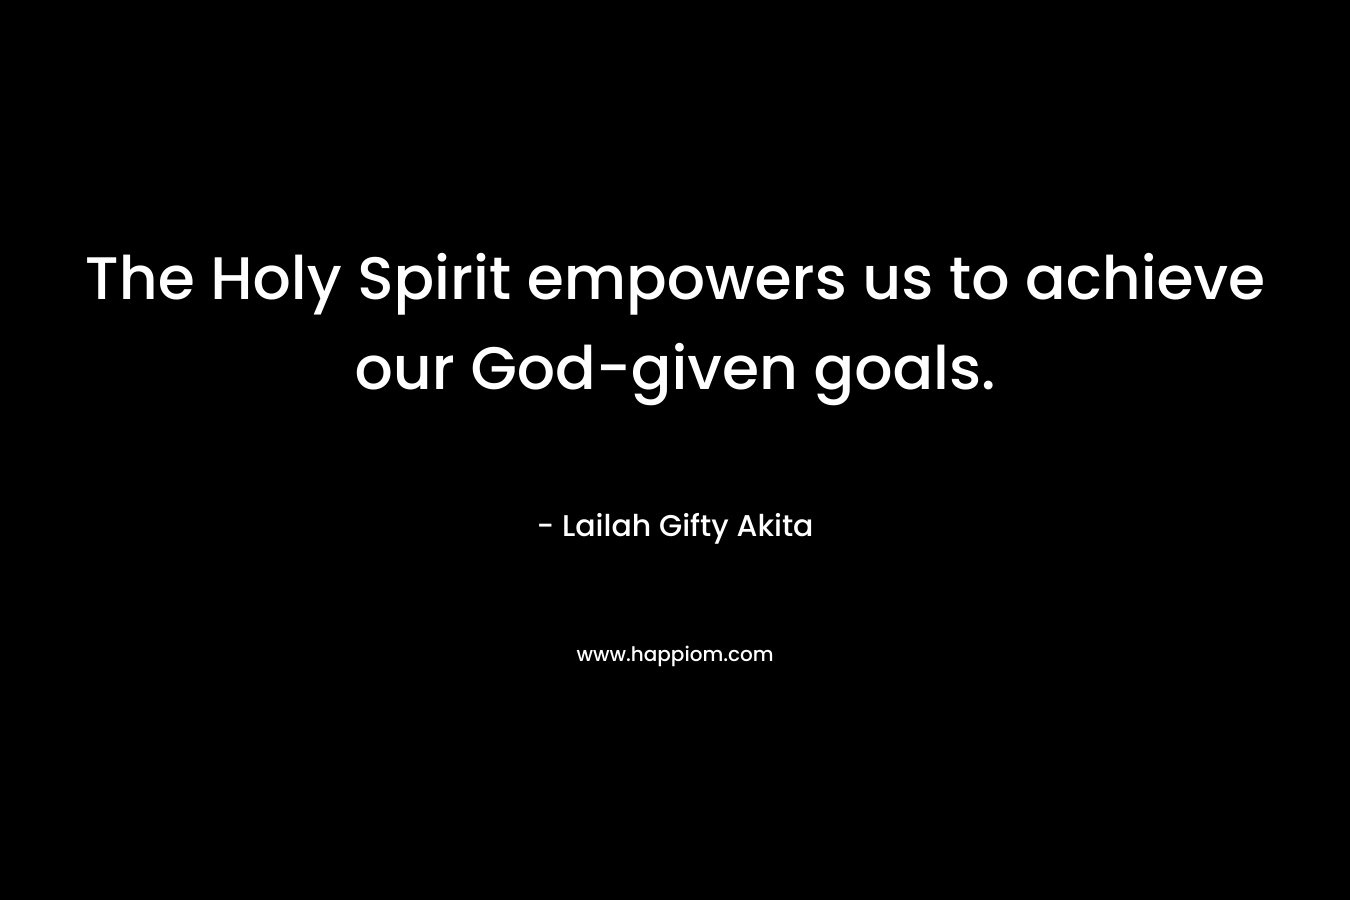 The Holy Spirit empowers us to achieve our God-given goals. – Lailah Gifty Akita